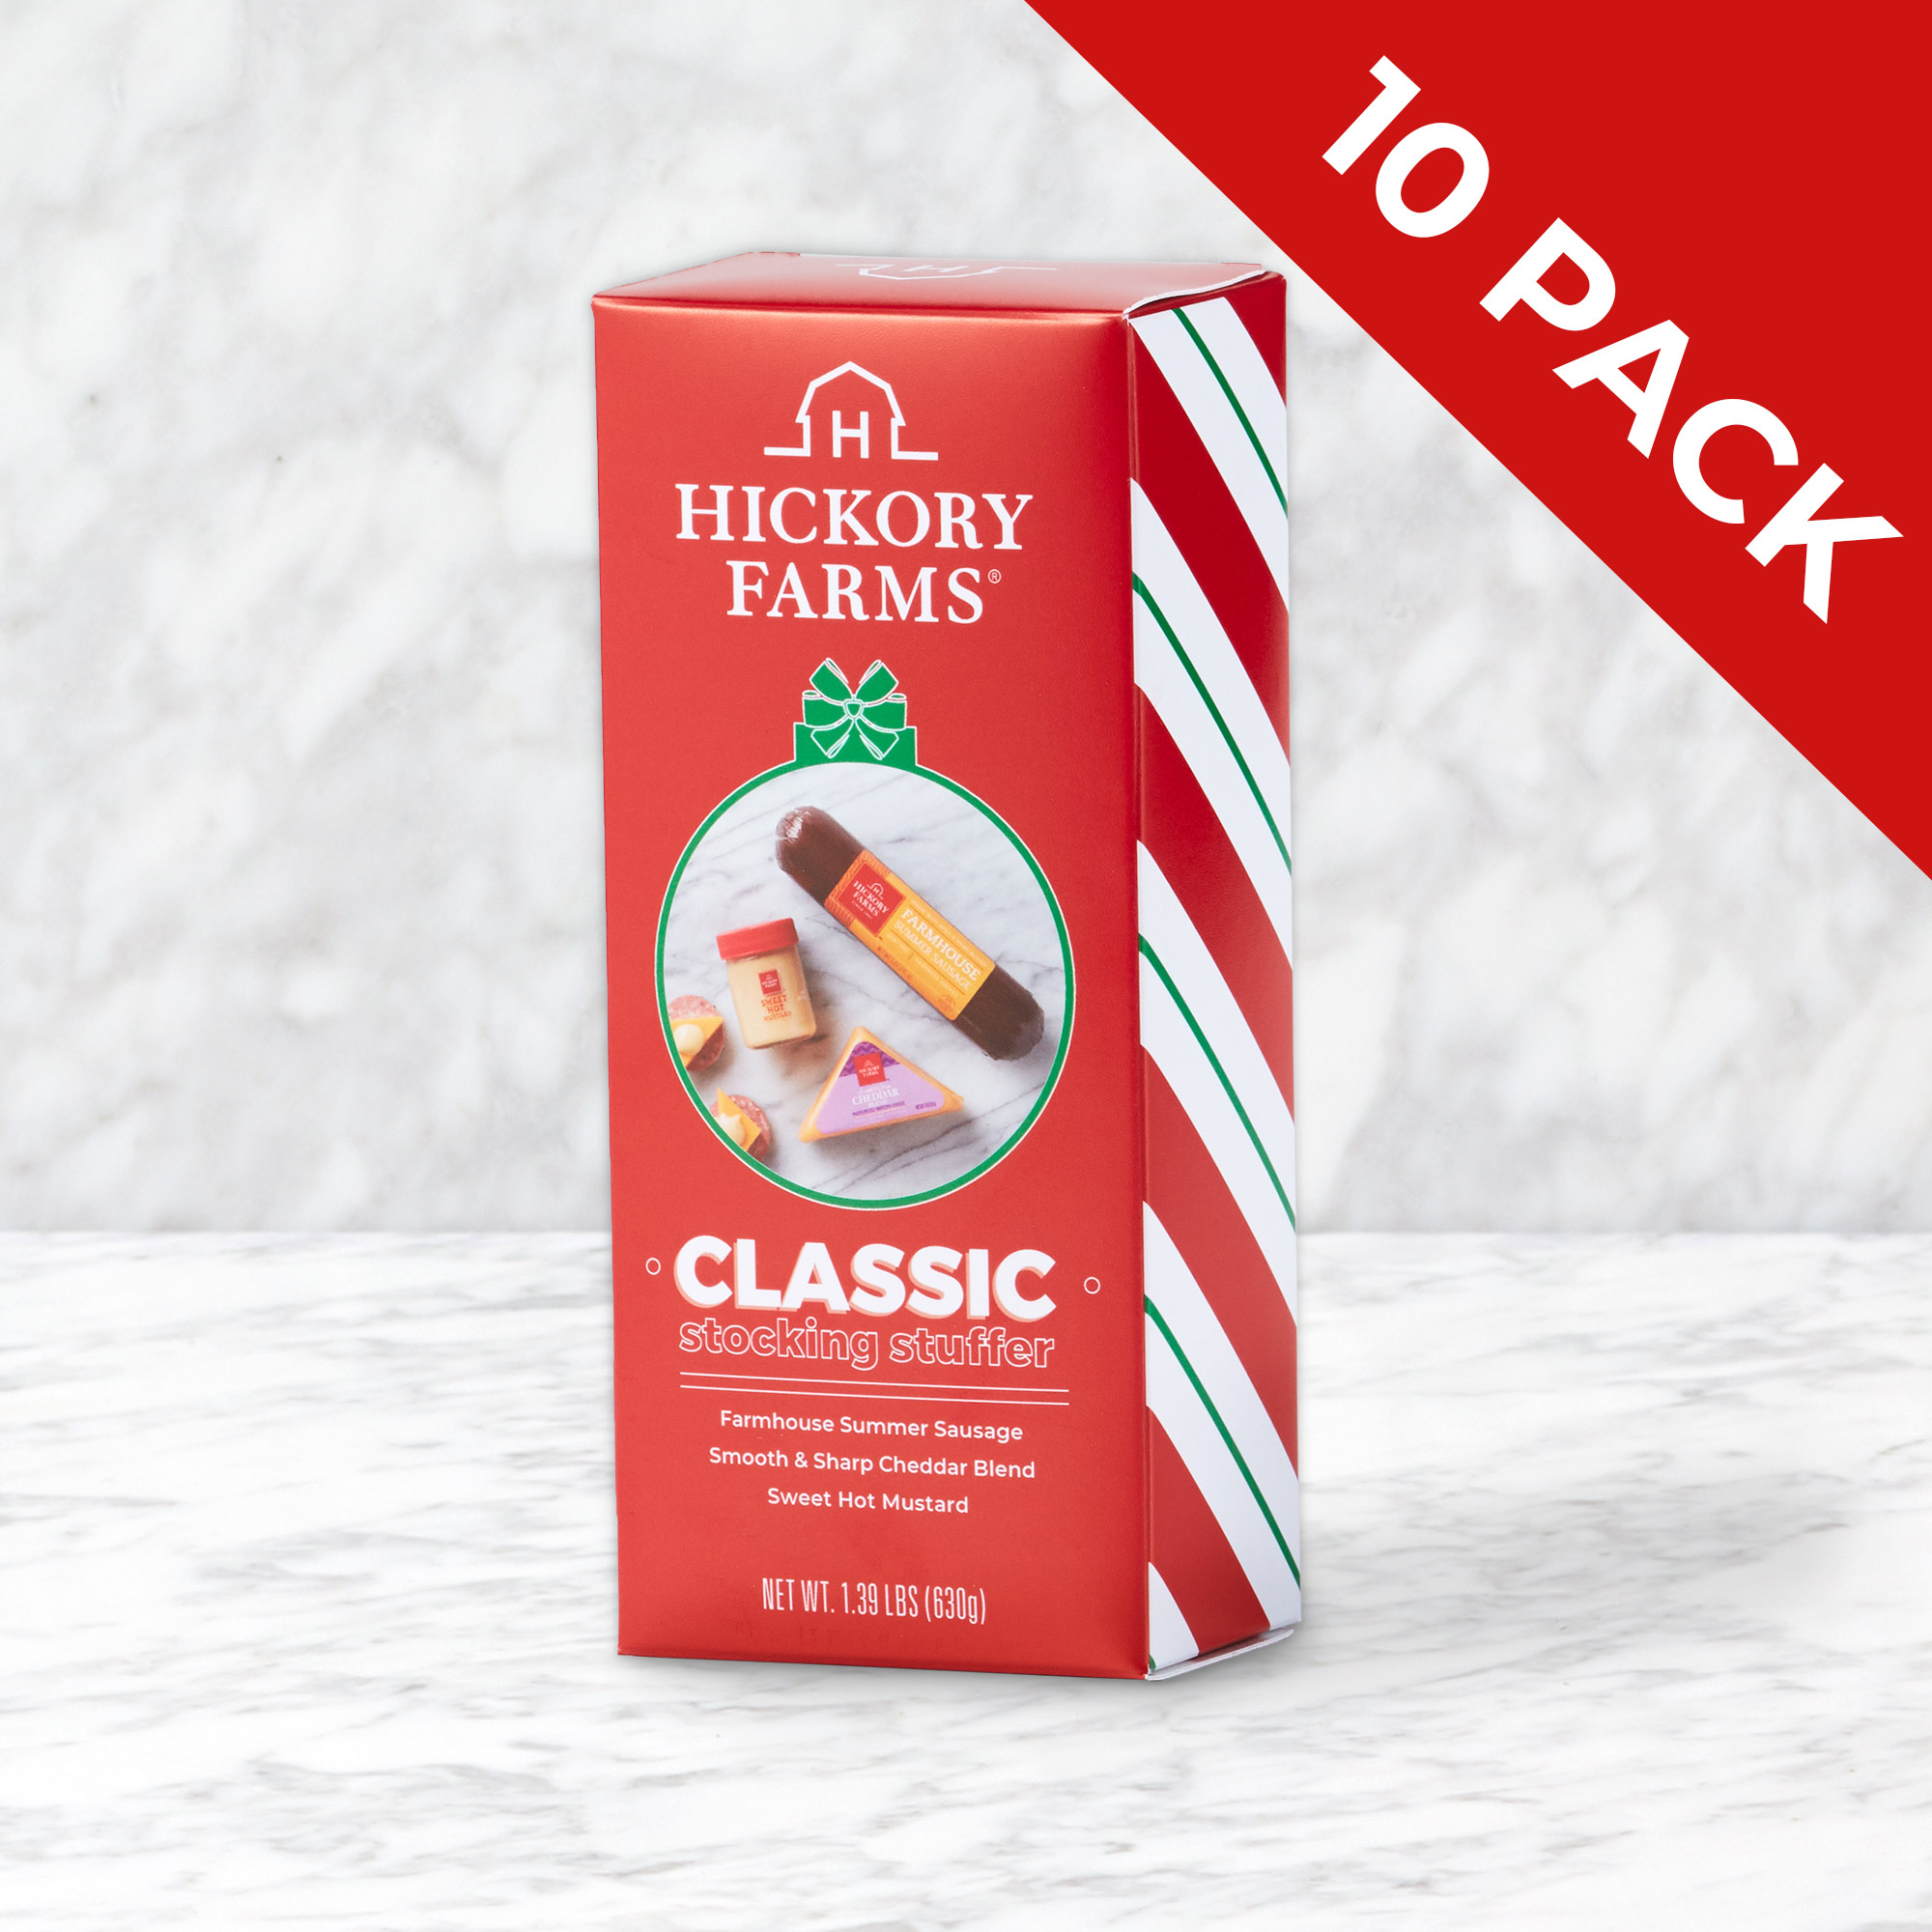 https://www.hickoryfarms.com/on/demandware.static/-/Sites-Web-Master-Catalog/default/dw124f1c8d/images/products/10-pack-case-classic-stocking-stuffer-017000-1.jpg